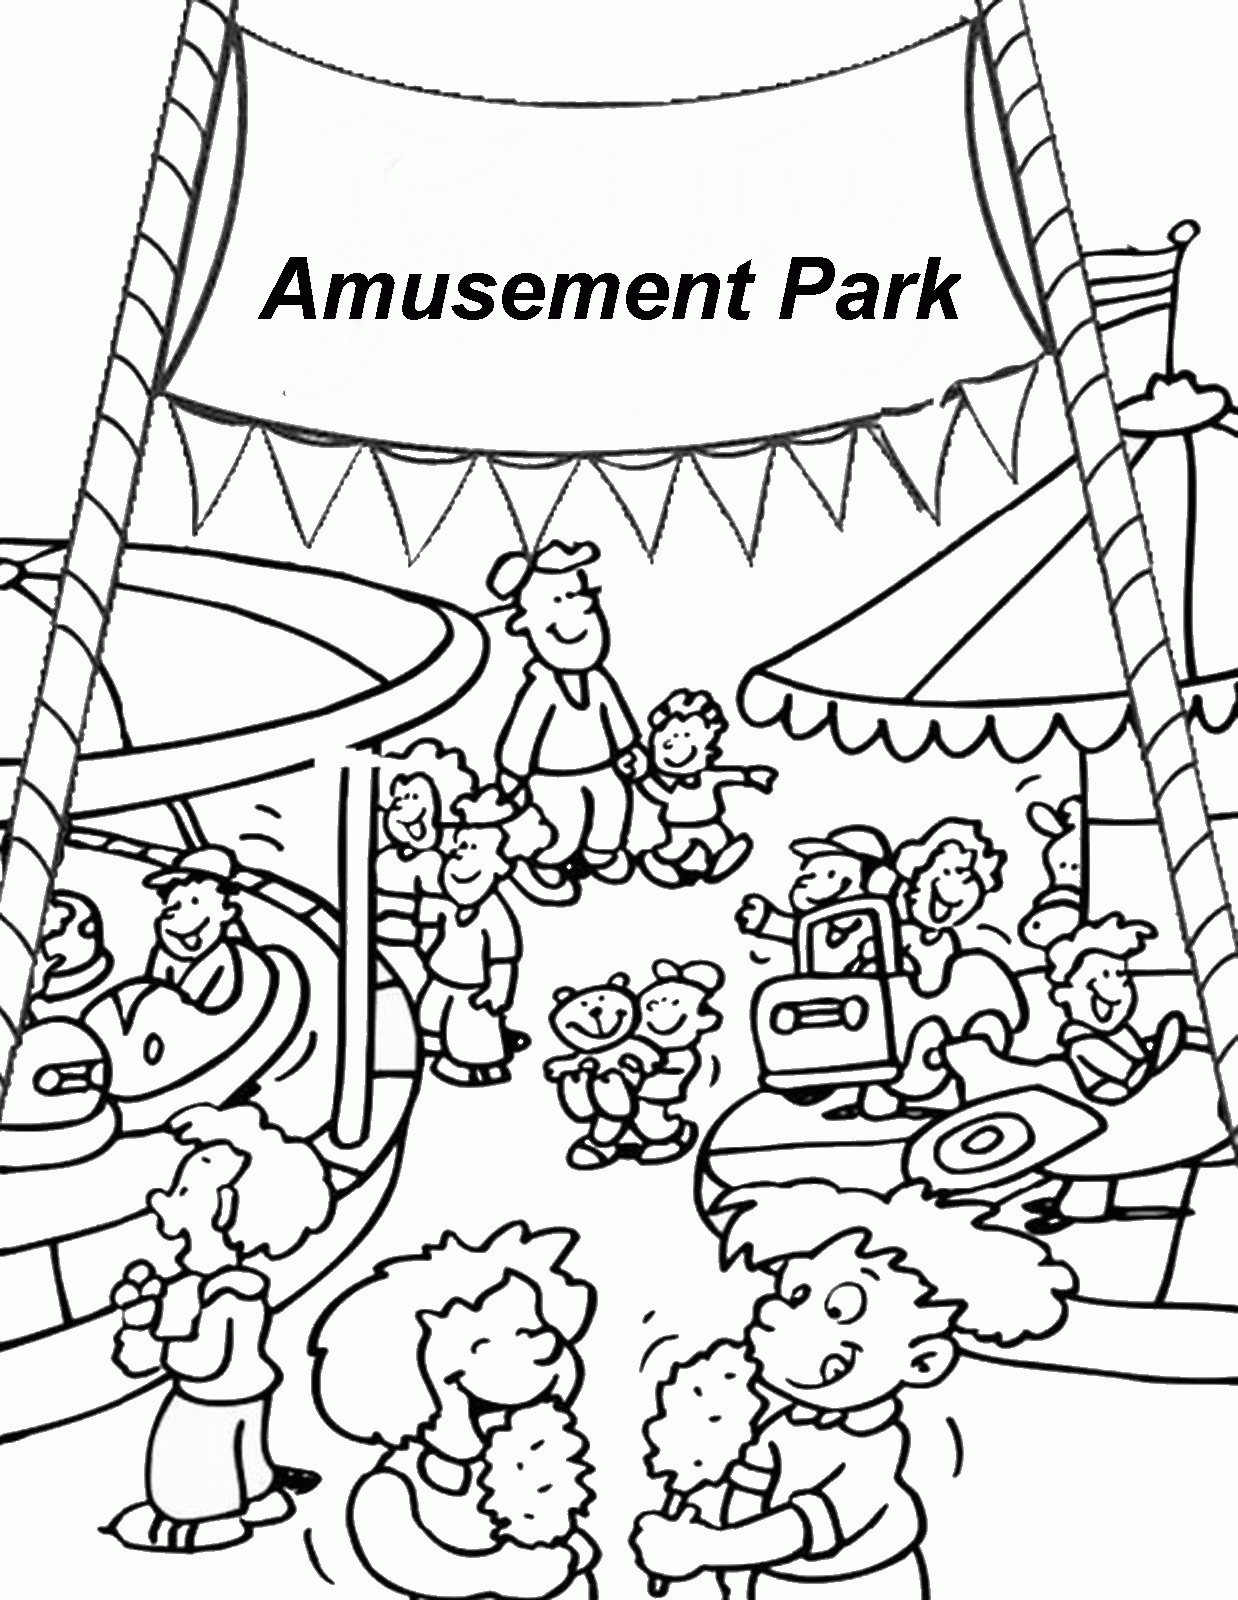 free-park-coloring-page-download-free-park-coloring-page-png-images